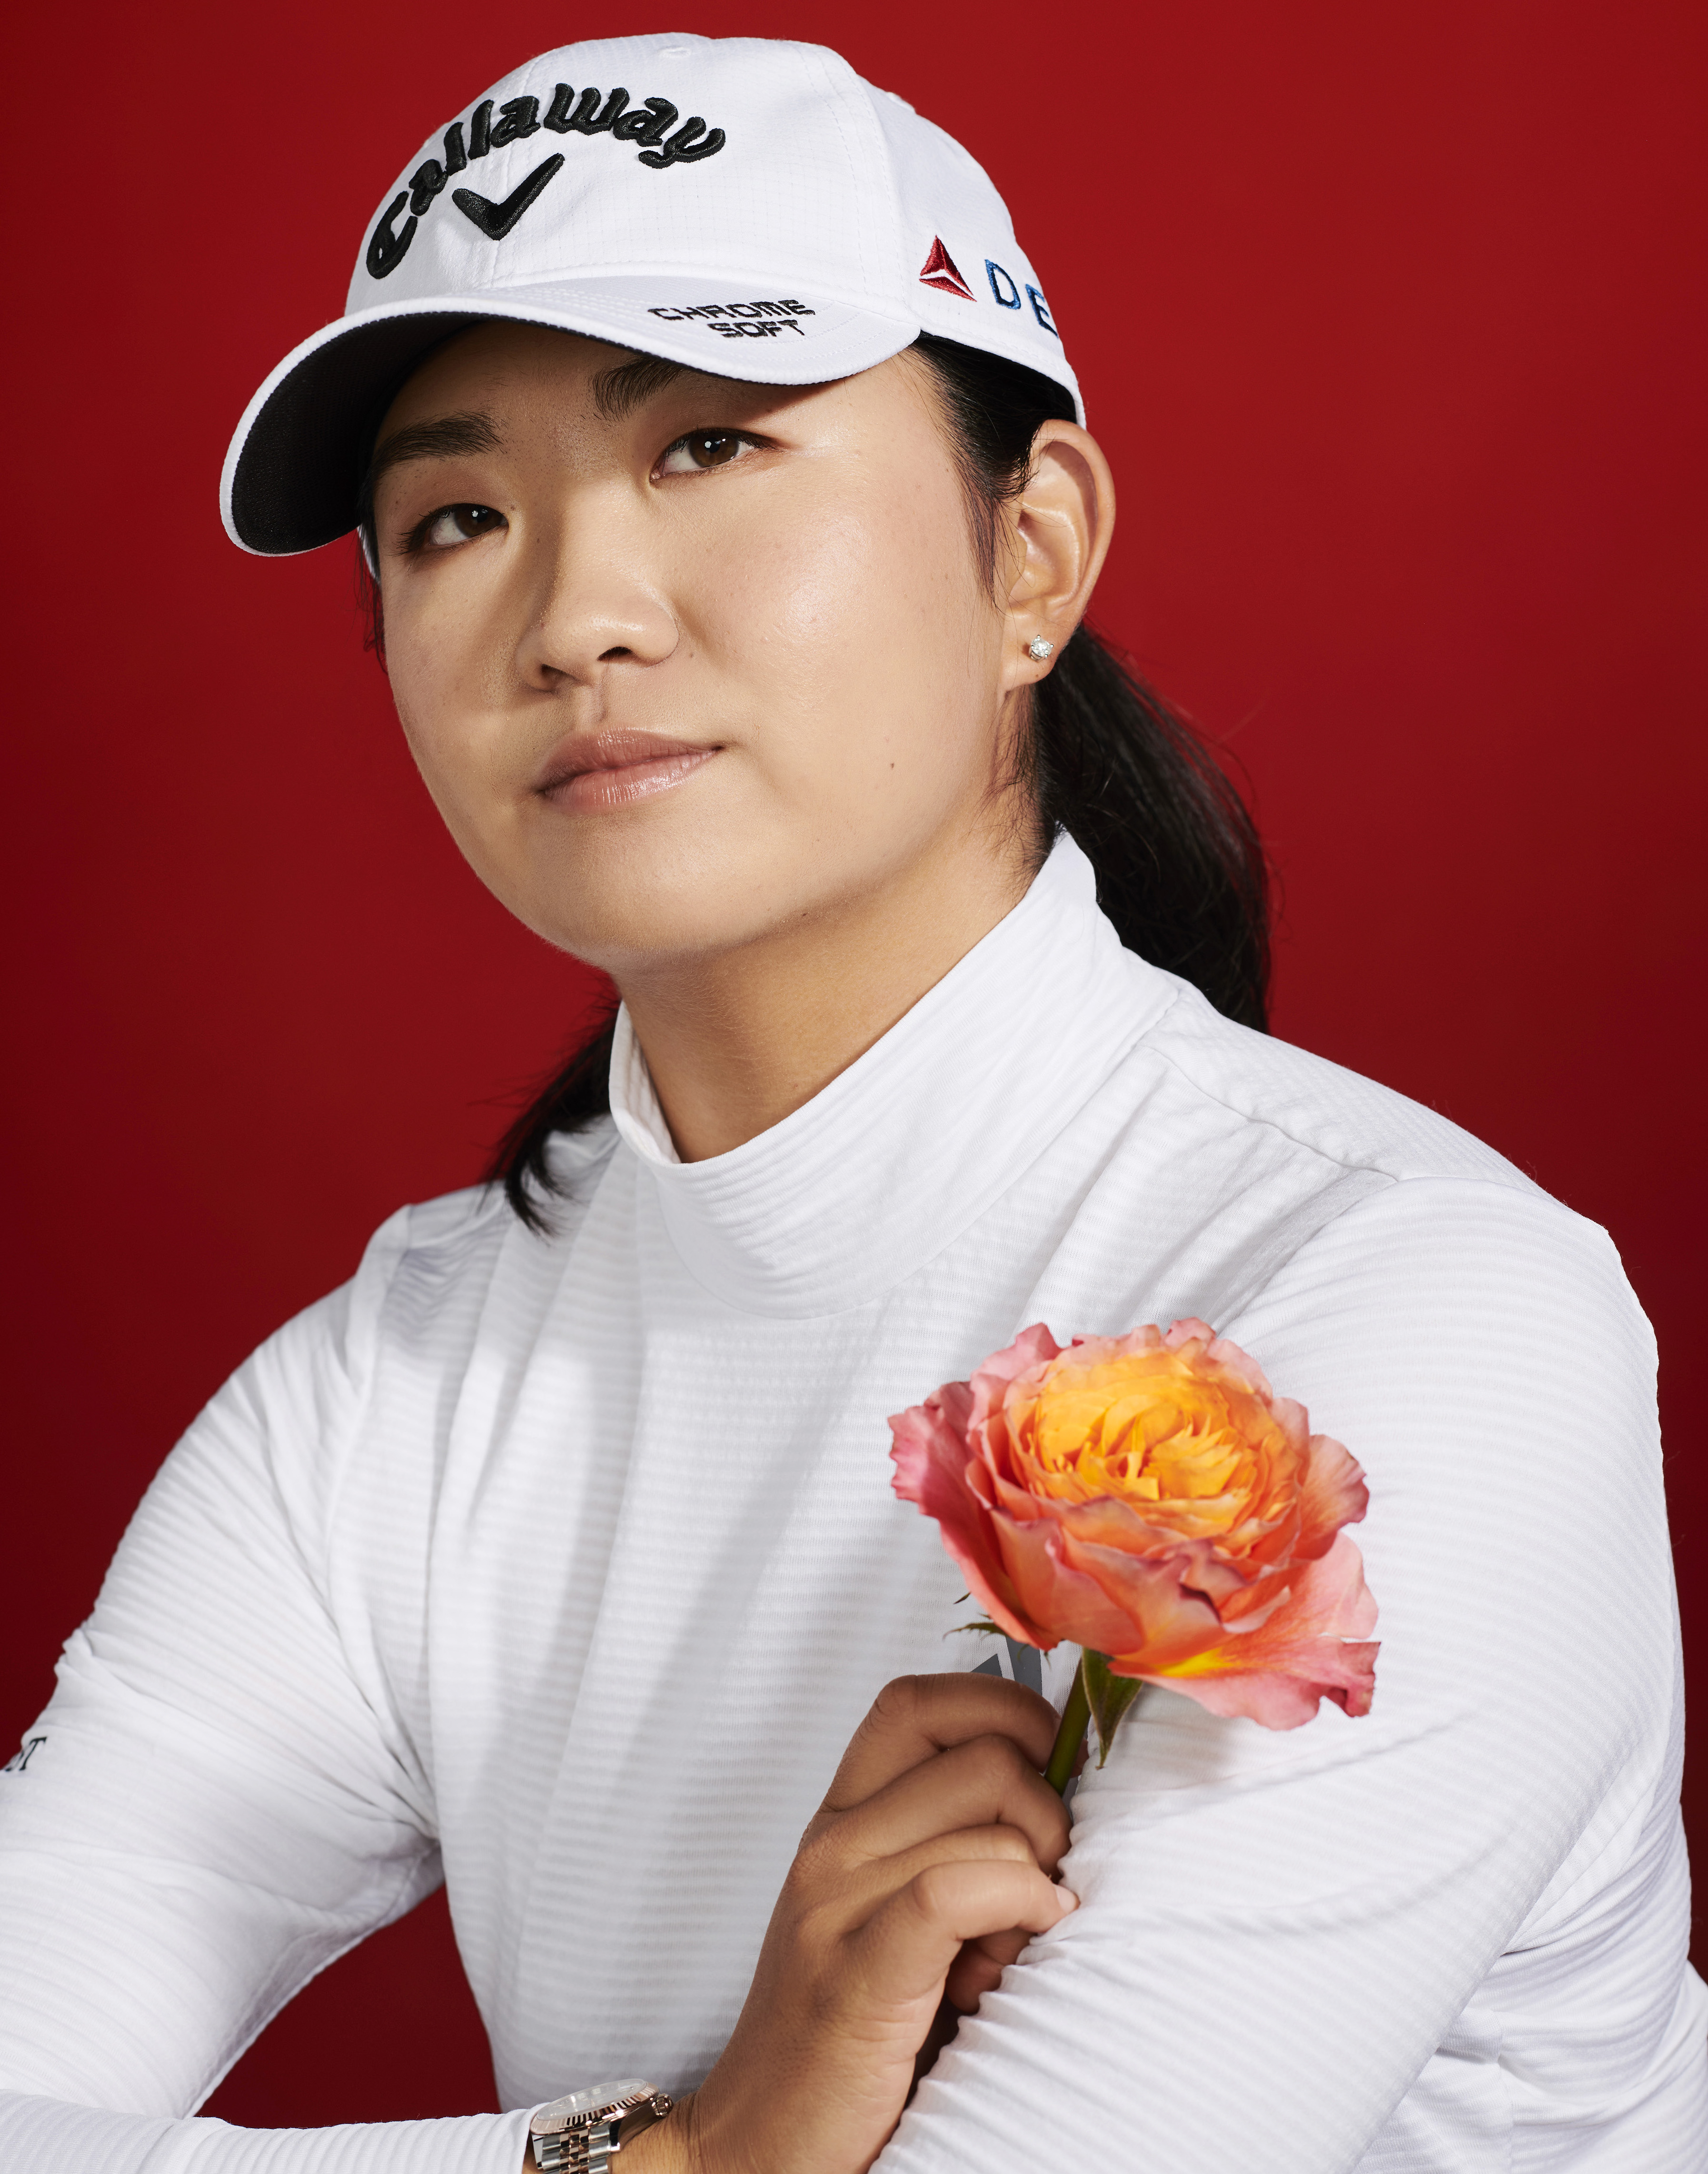 What's next for 20-year-old budding star Rose Zhang?